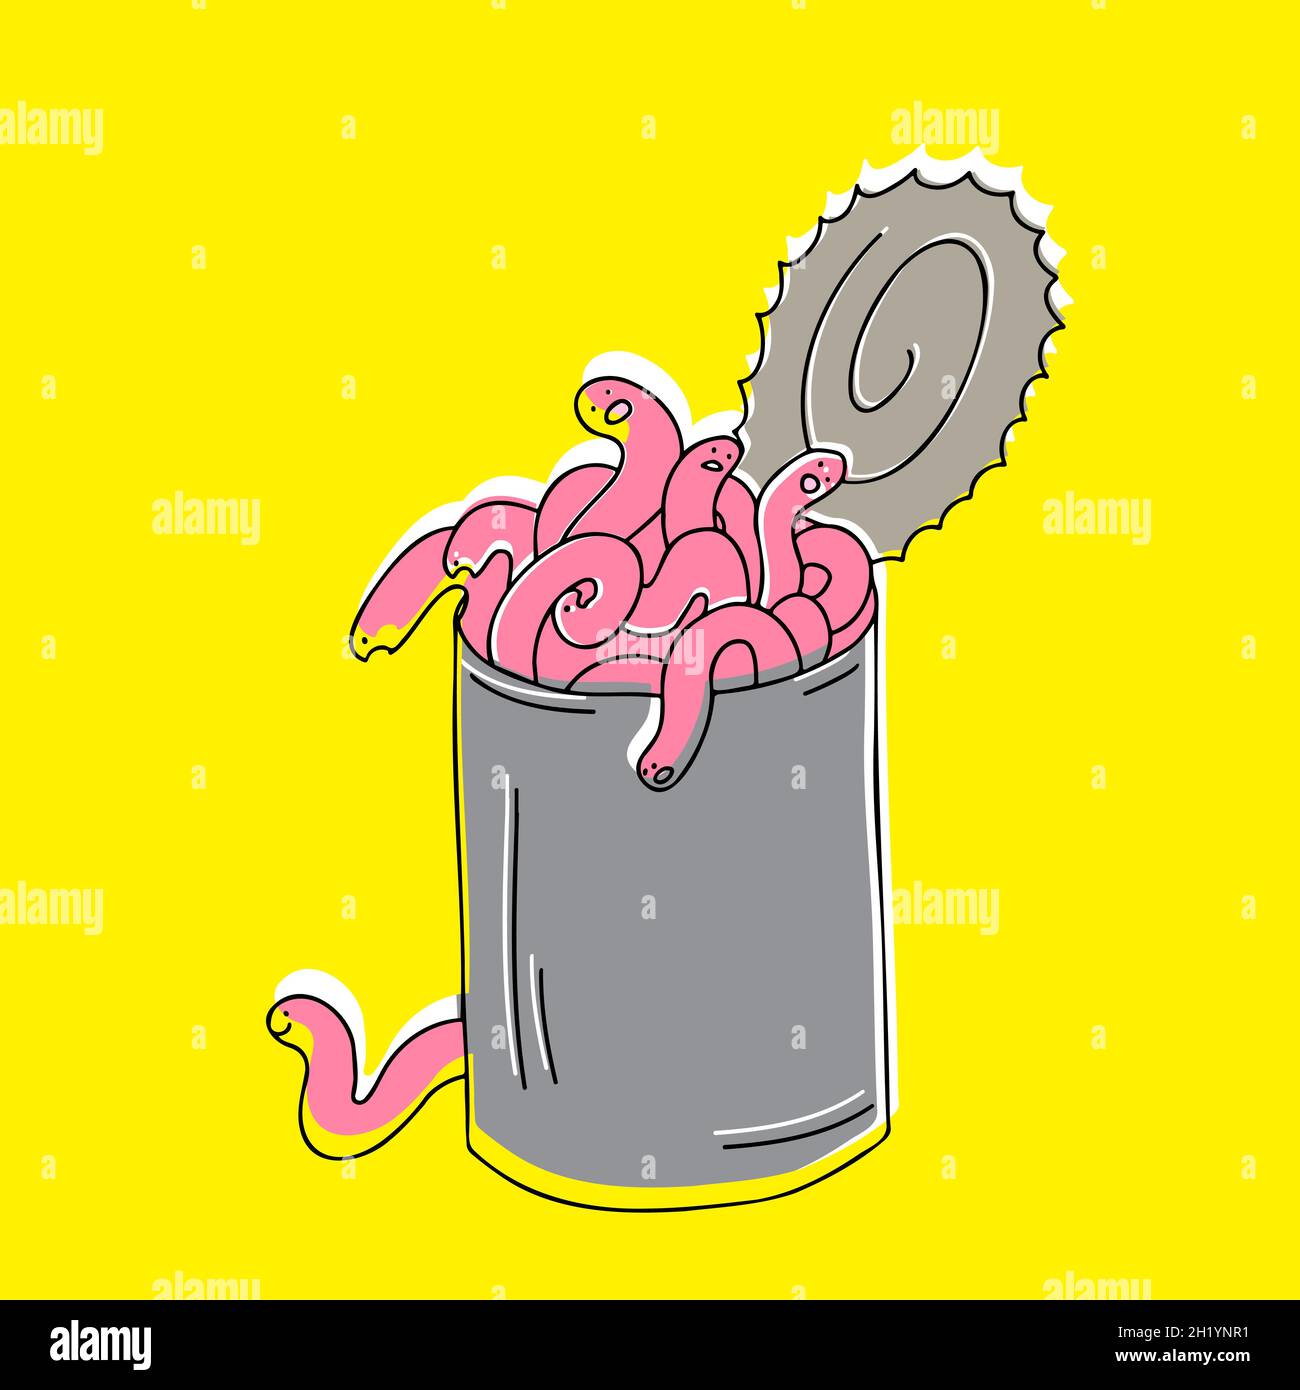 Can of worms. Proverb, metaphoric idiom. Concept of complication. Stock Vector